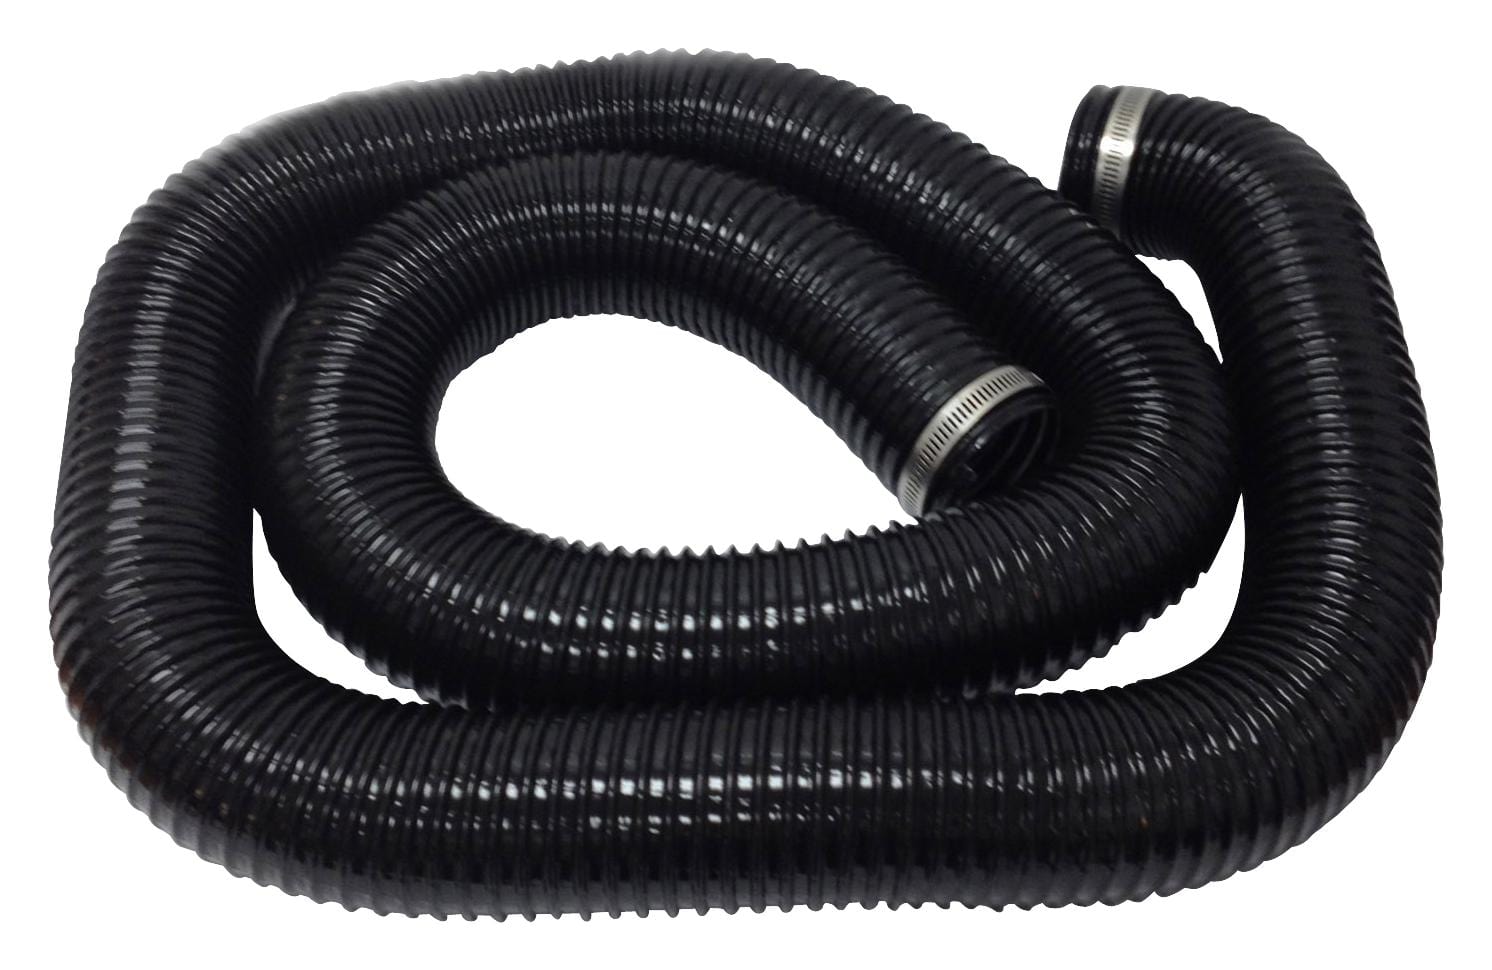 METCAL Fume Extractor Accessories CH0252 CONNECTION HOSE, 3.5M X 63MM METCAL 3051927 CH0252